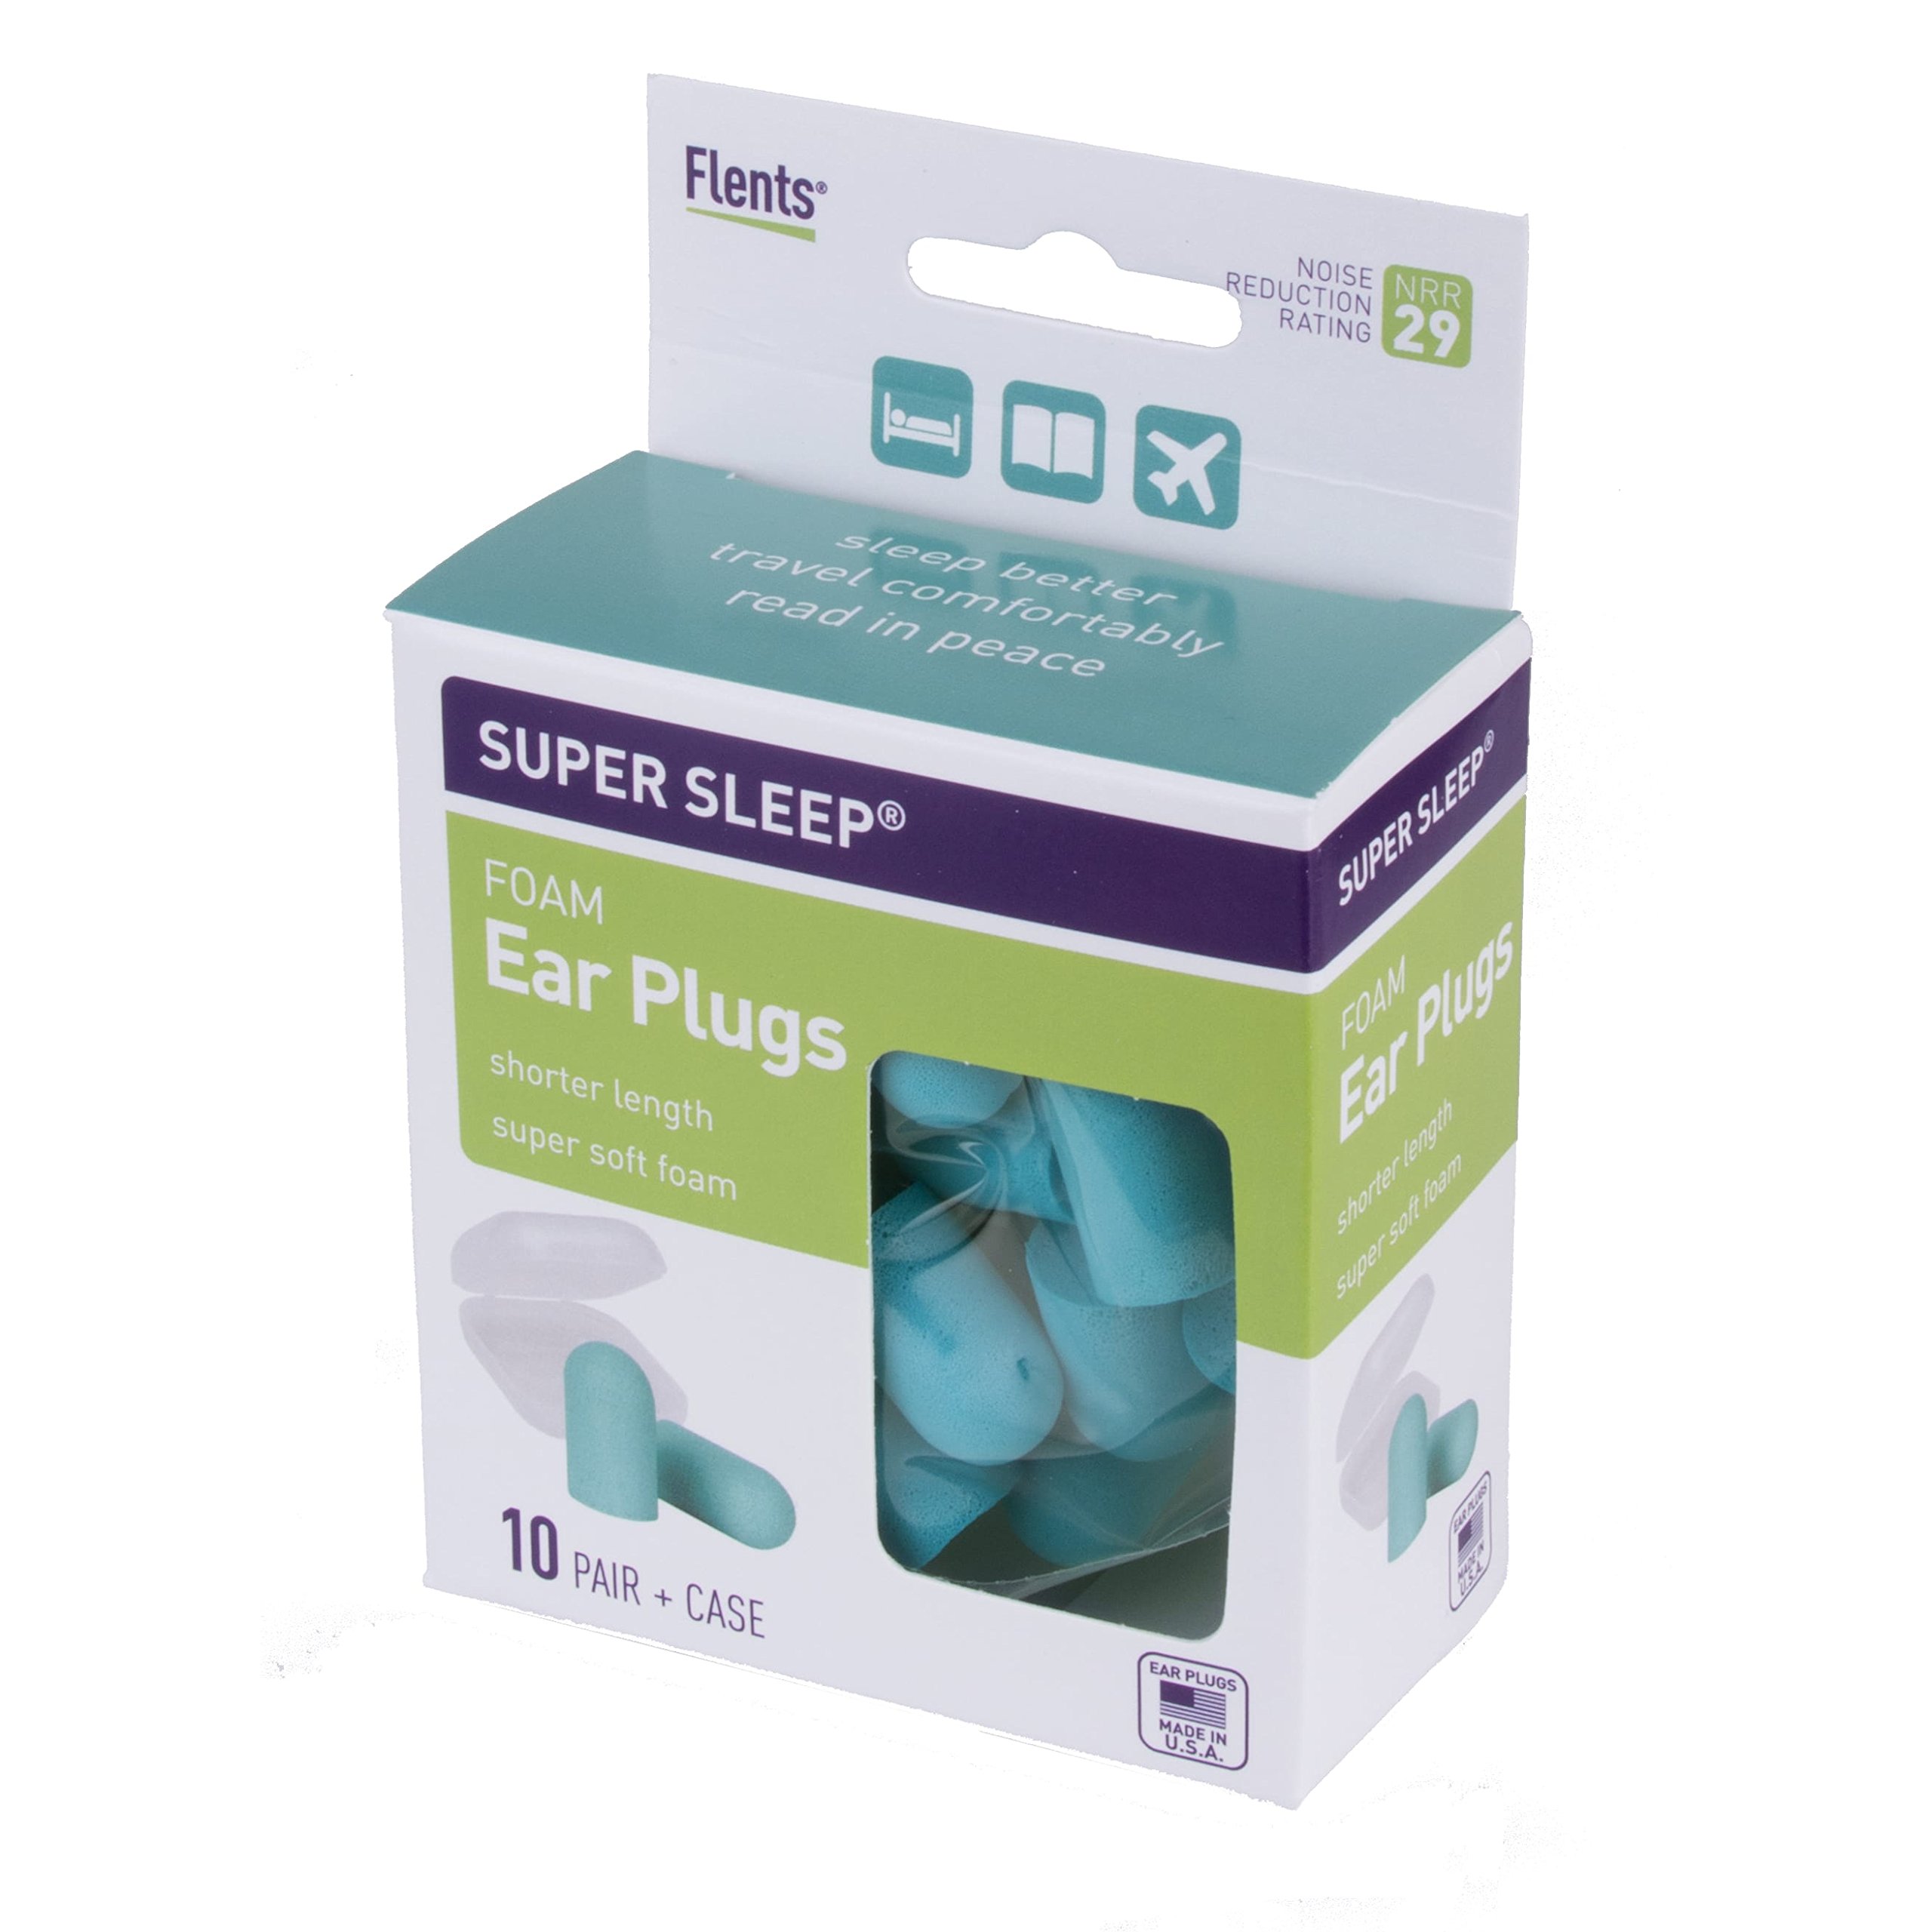 Flents Super Sleep Comfort Foam Ear Plugs/Earplugs | 10 Pair | Case Included | NRR 29 | Made in The USA